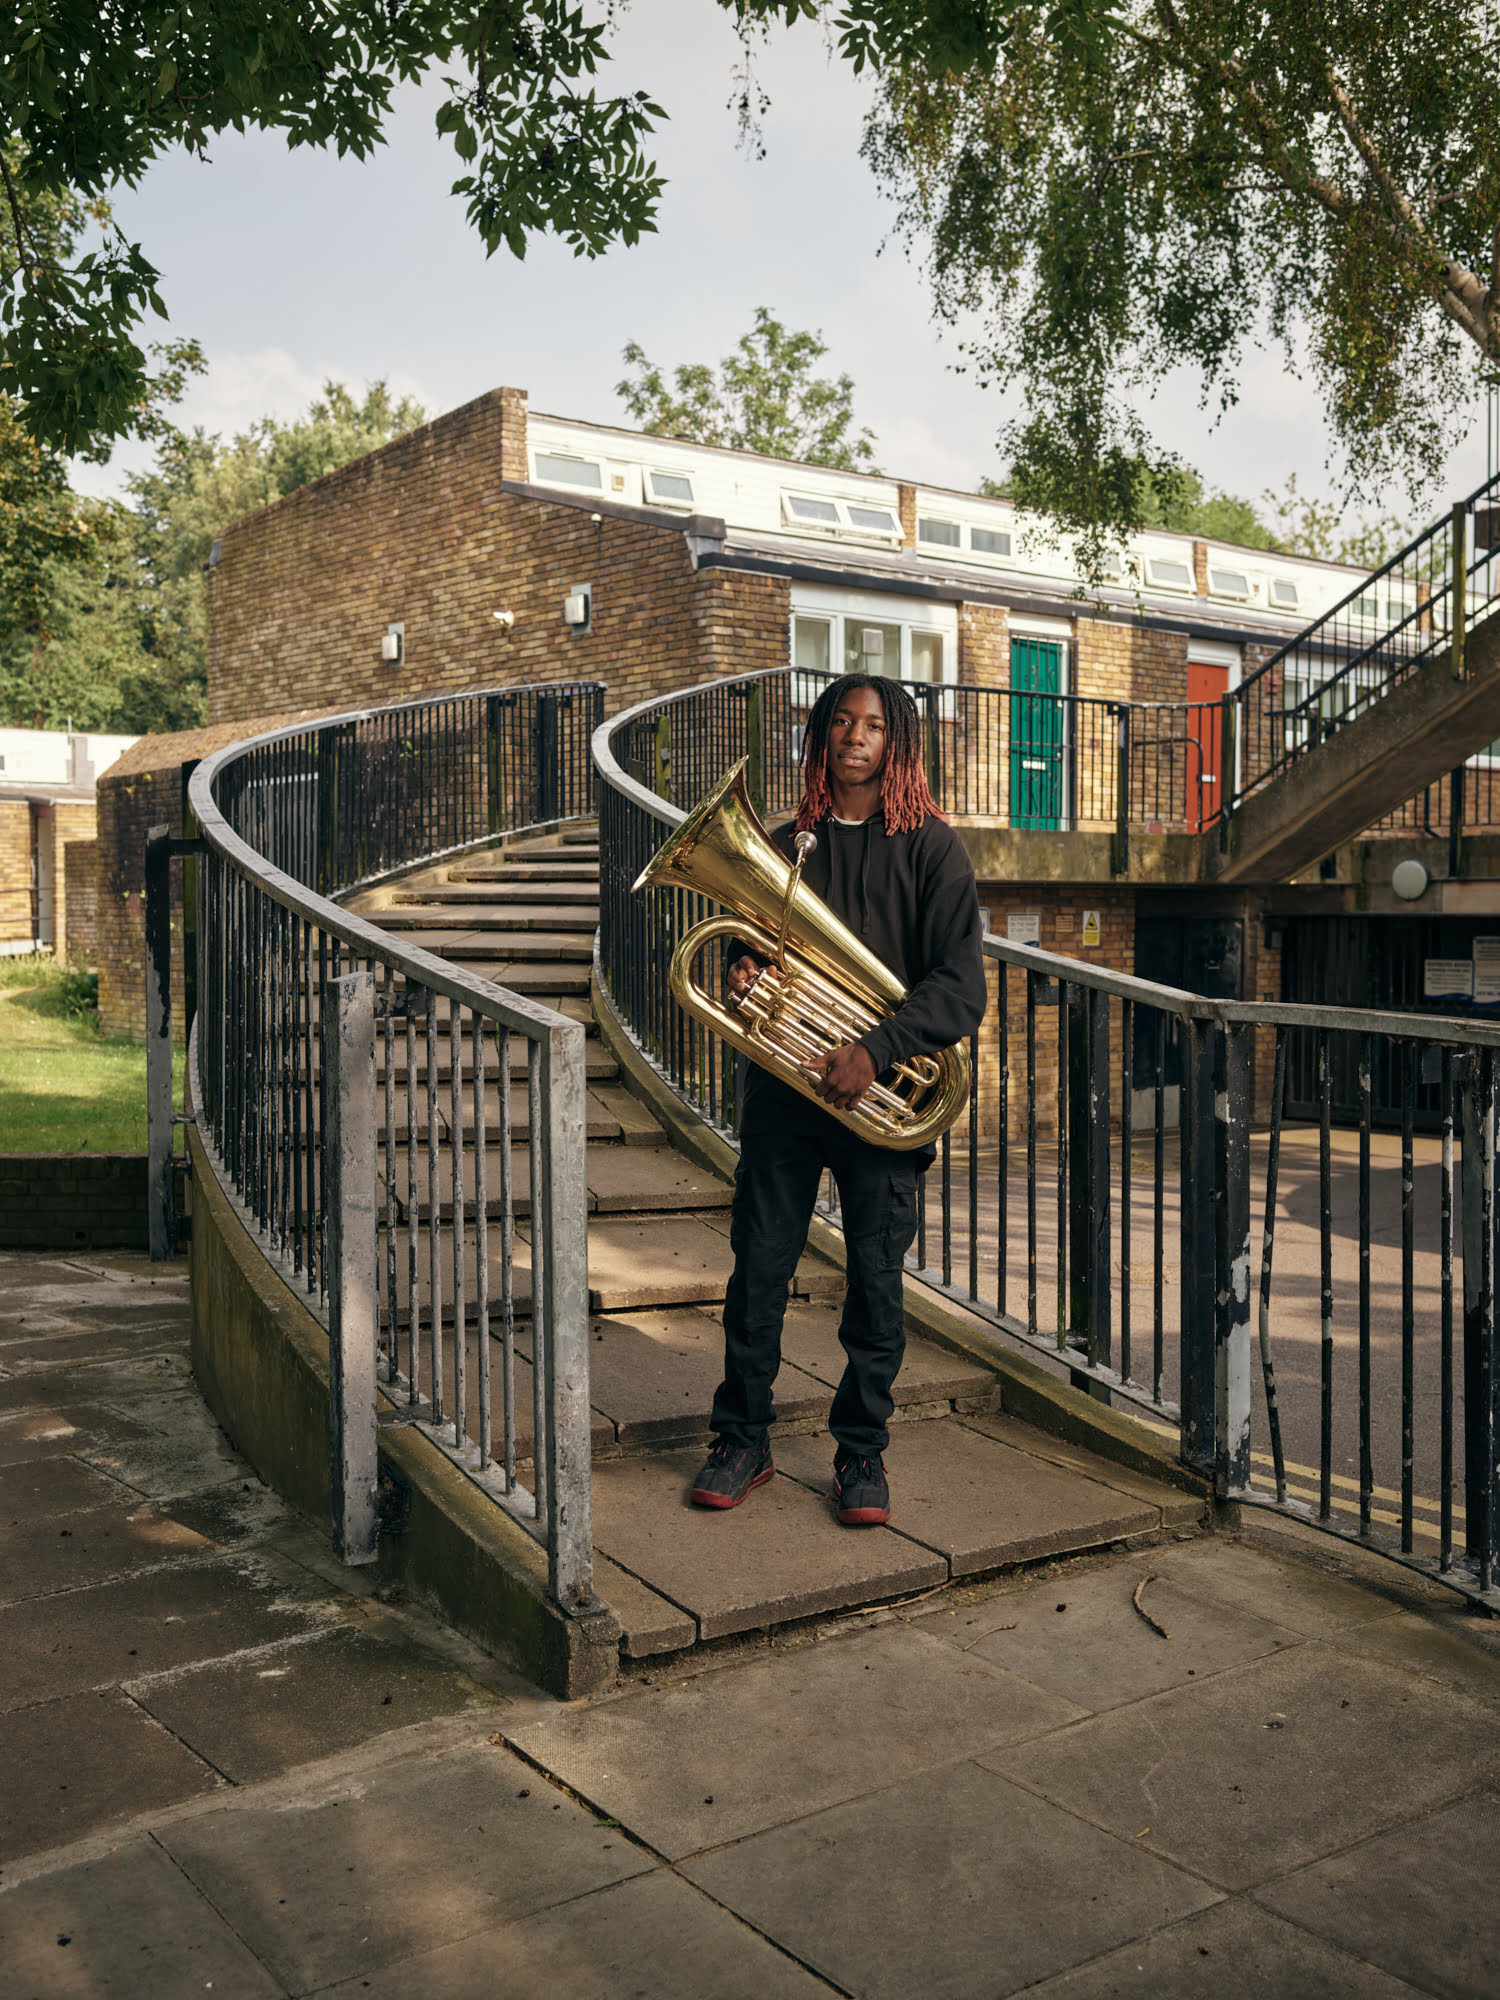 Teigan Hastings, Cressingham Gardens Estate. A self-taught player and remarkably assured young man, Teigan joined BCO for the Summer Estates Tour 2021, age just 15, after seeing the roving band performing down his street and asking to audition. He hopes to join the Navy and become an engineer.